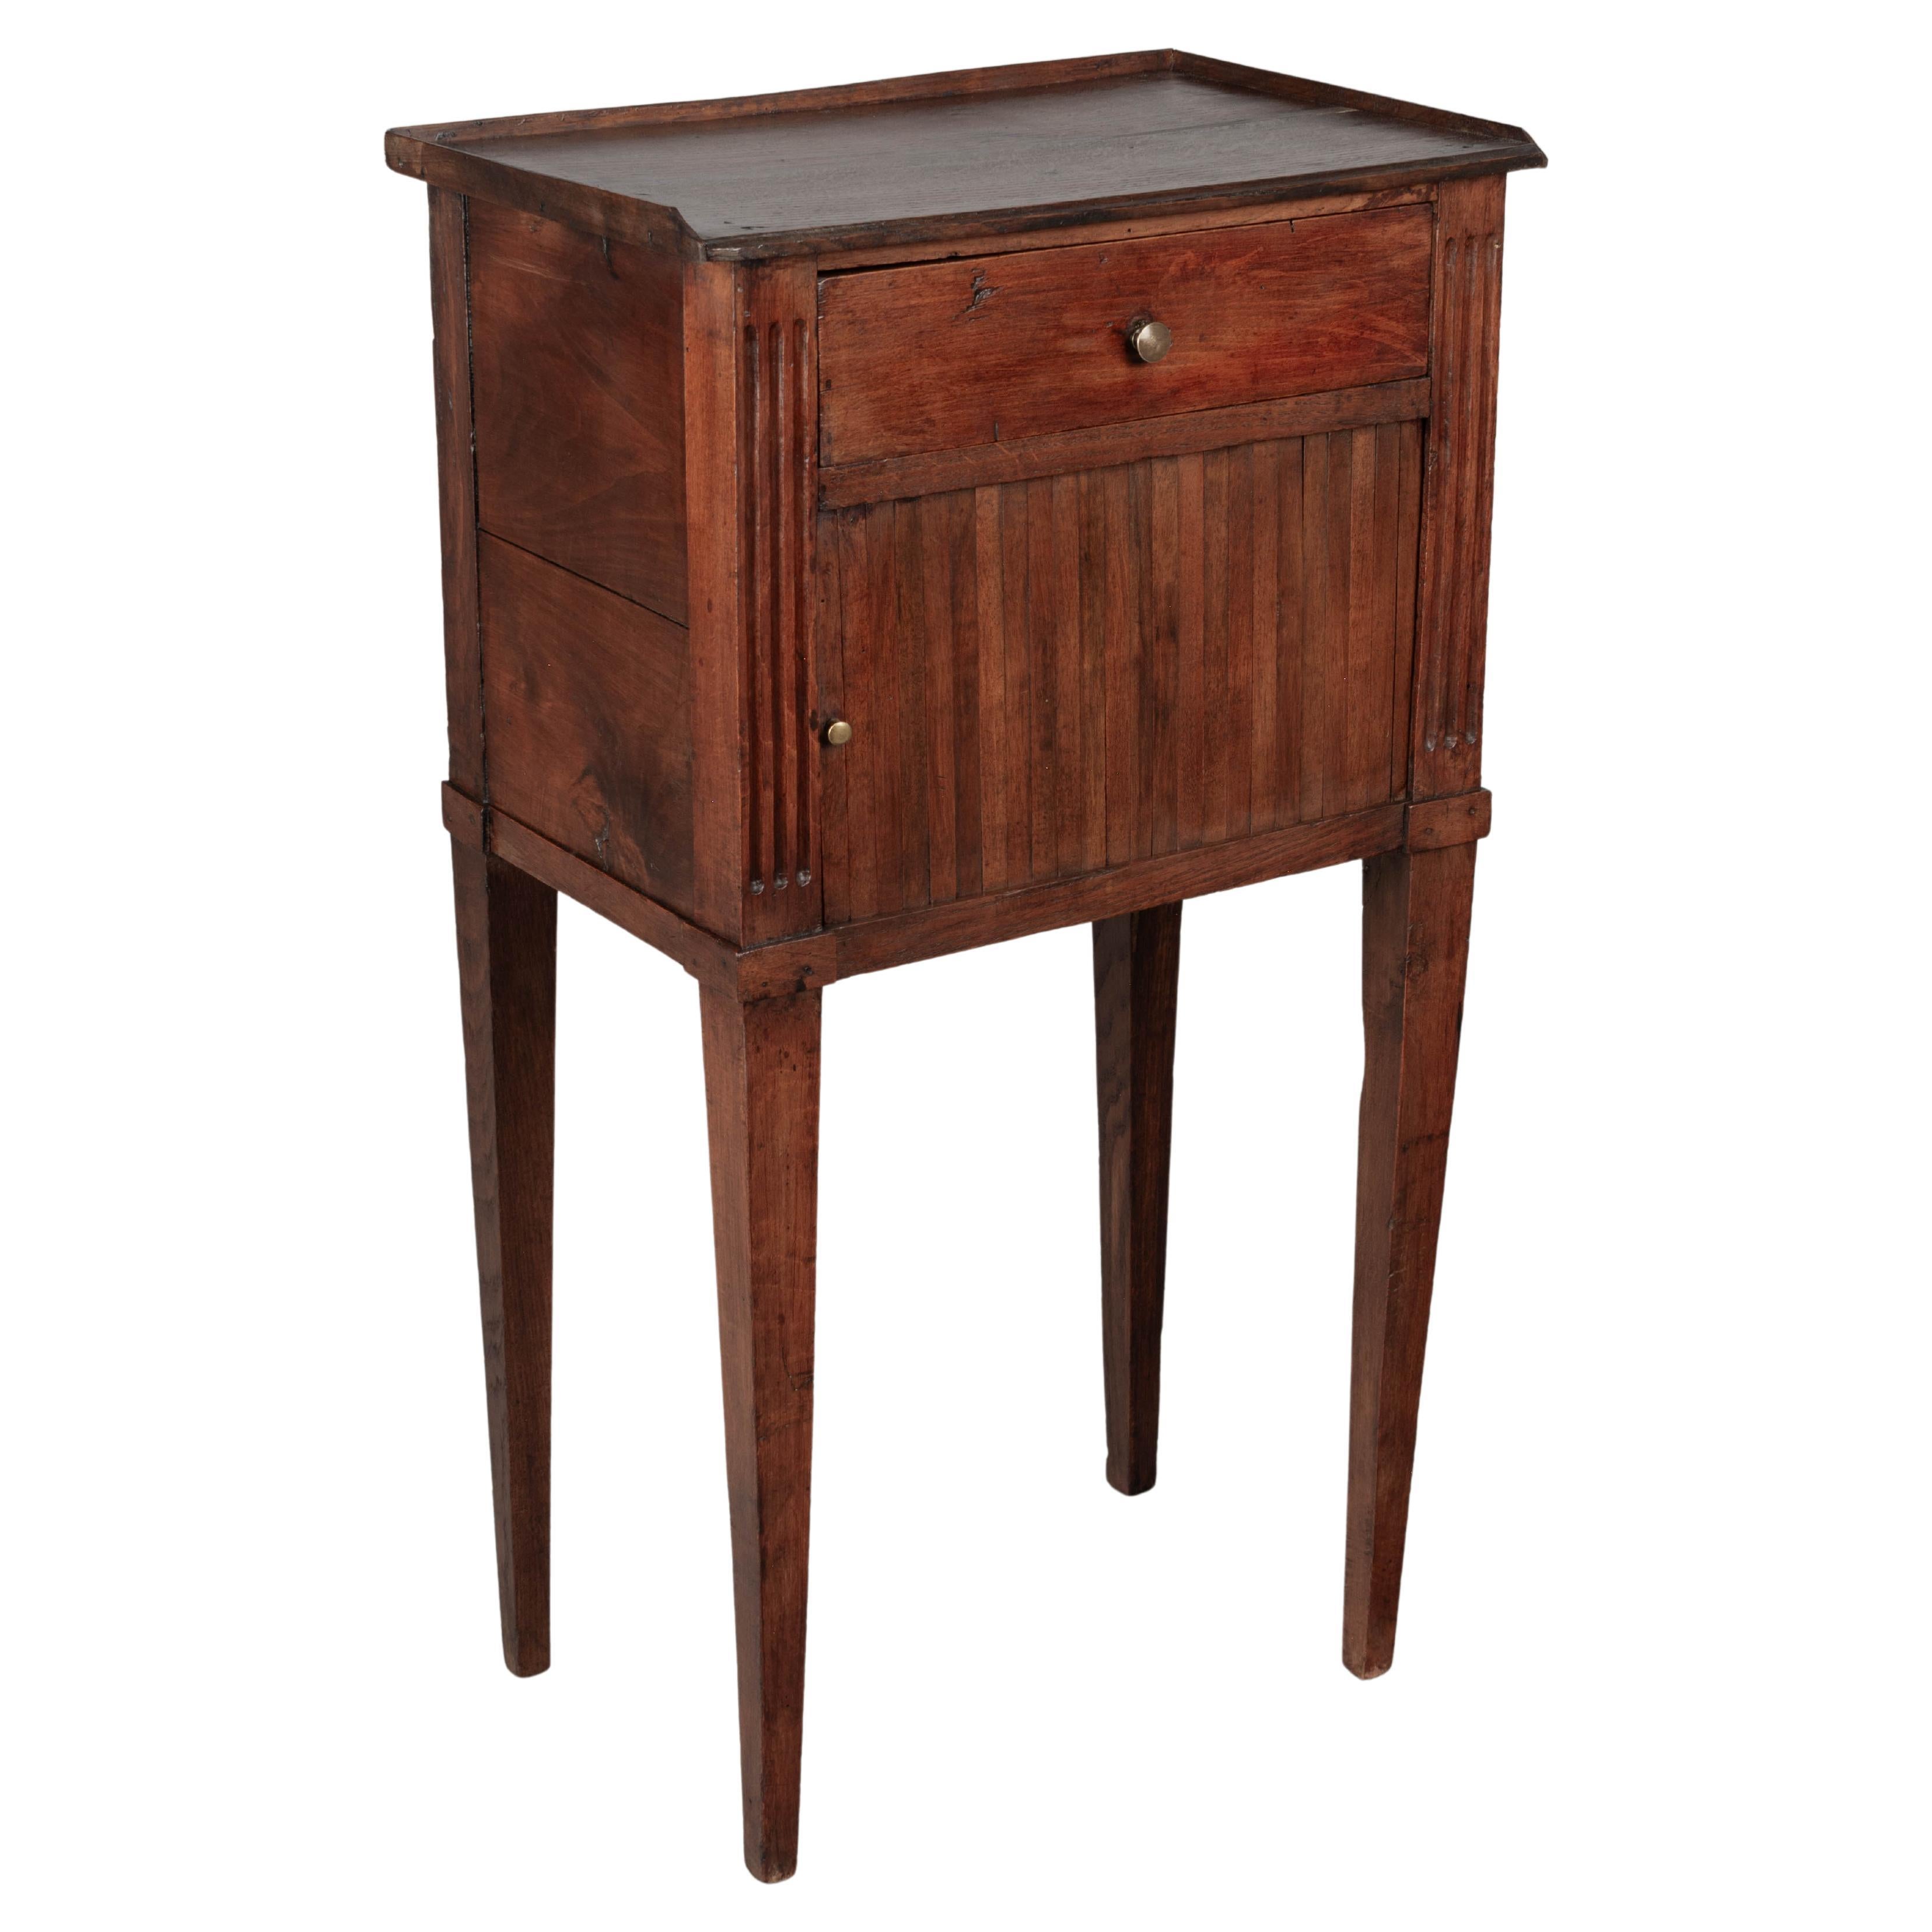 19th Century French Side Table with Tambour Door